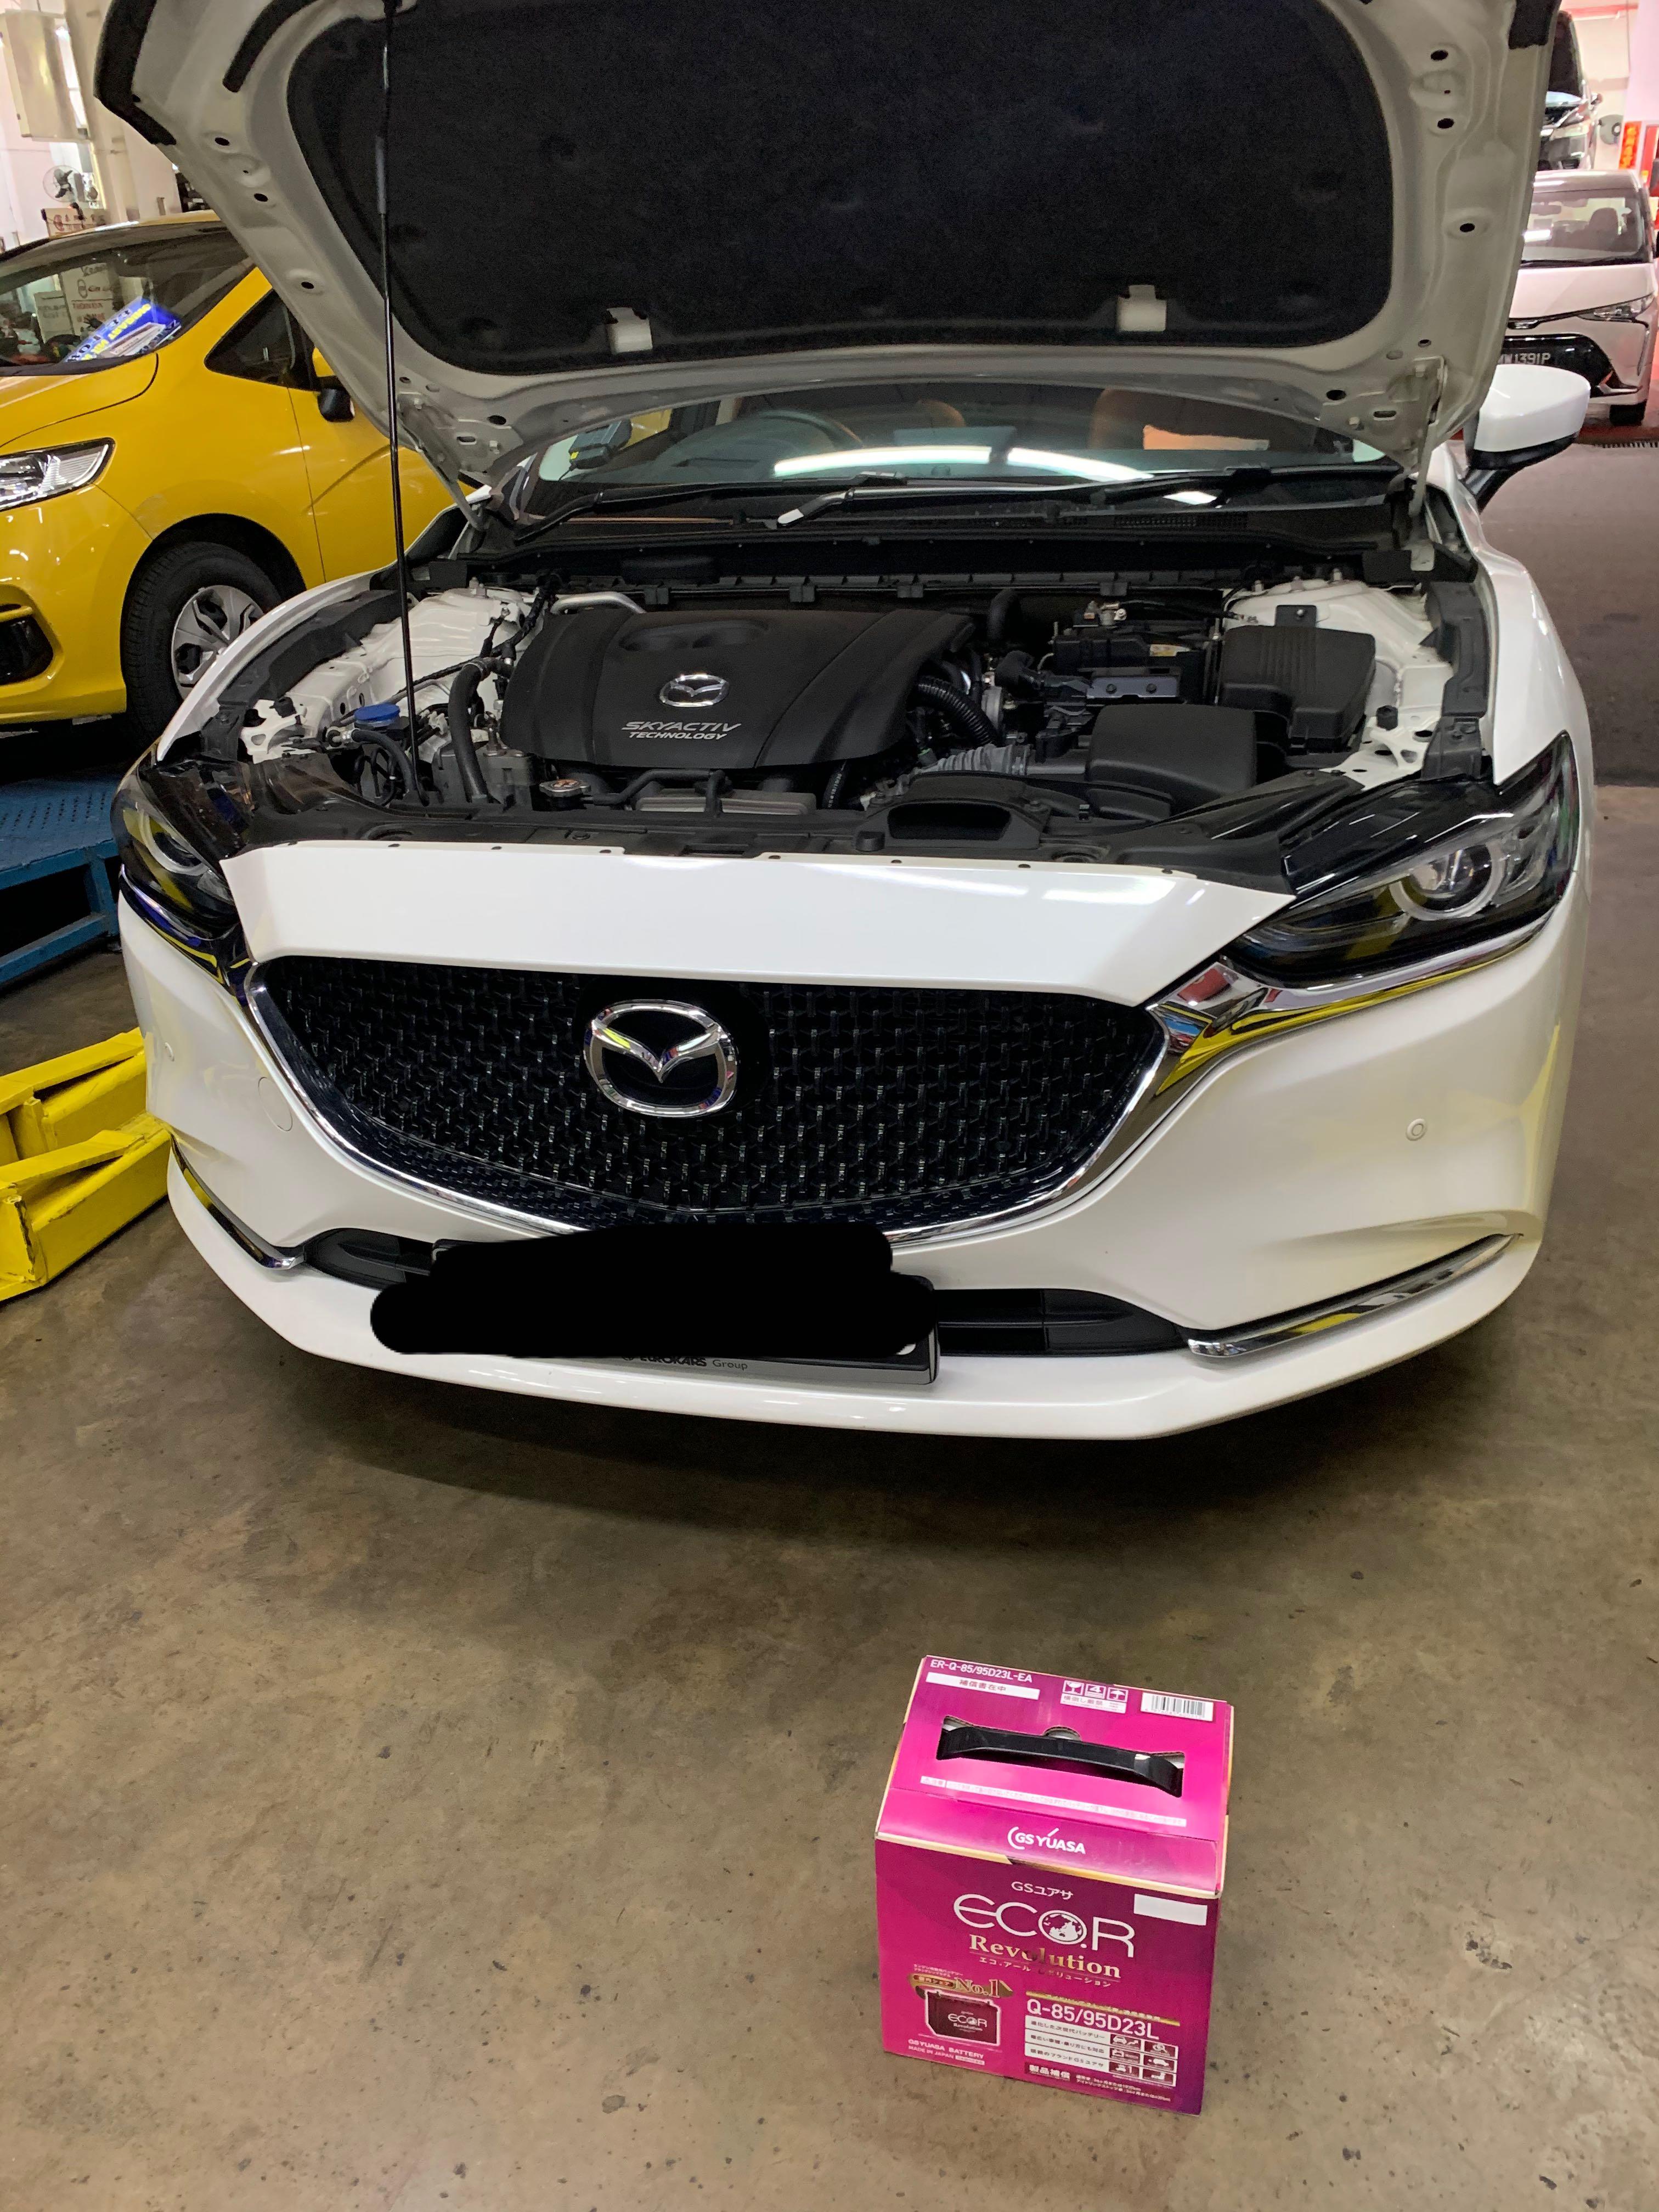 Mazda Start Stop Battery Mazda2 3 5 6 Yuasa Q85 Efb Start Stop Made In Japan Battery Support I Stop Car Accessories Electronics Lights On Carousell